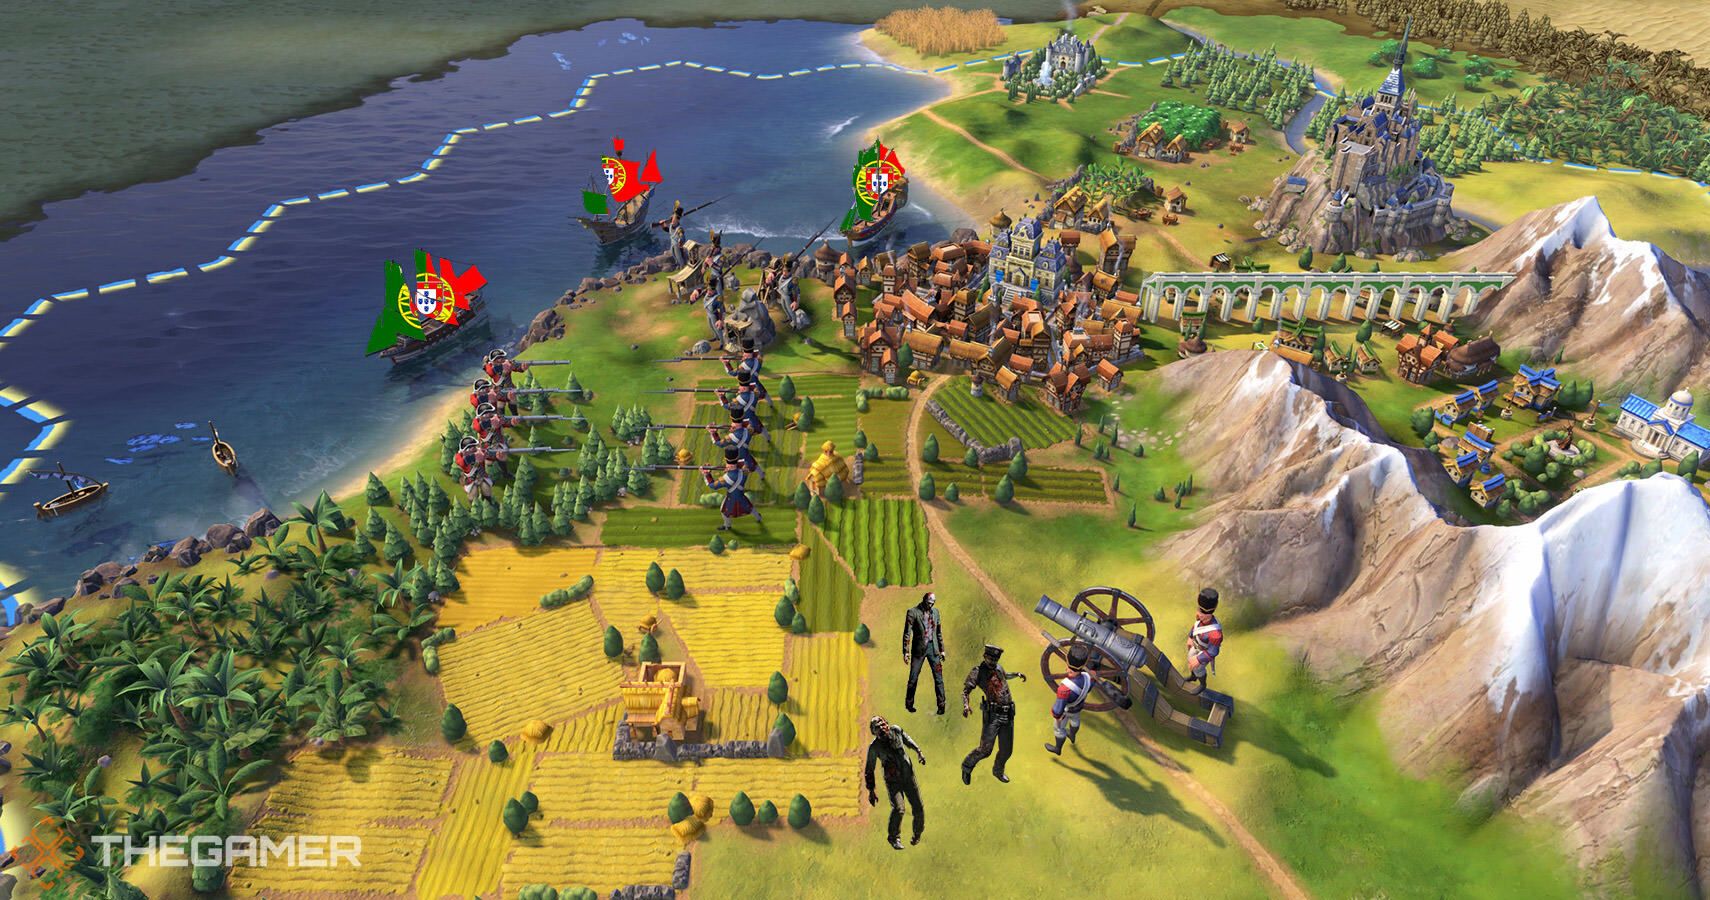 Control The Flow Of Spice As Portugal Or End The World In A Zombie Apocalypse In Upcoming Civ 6 Update